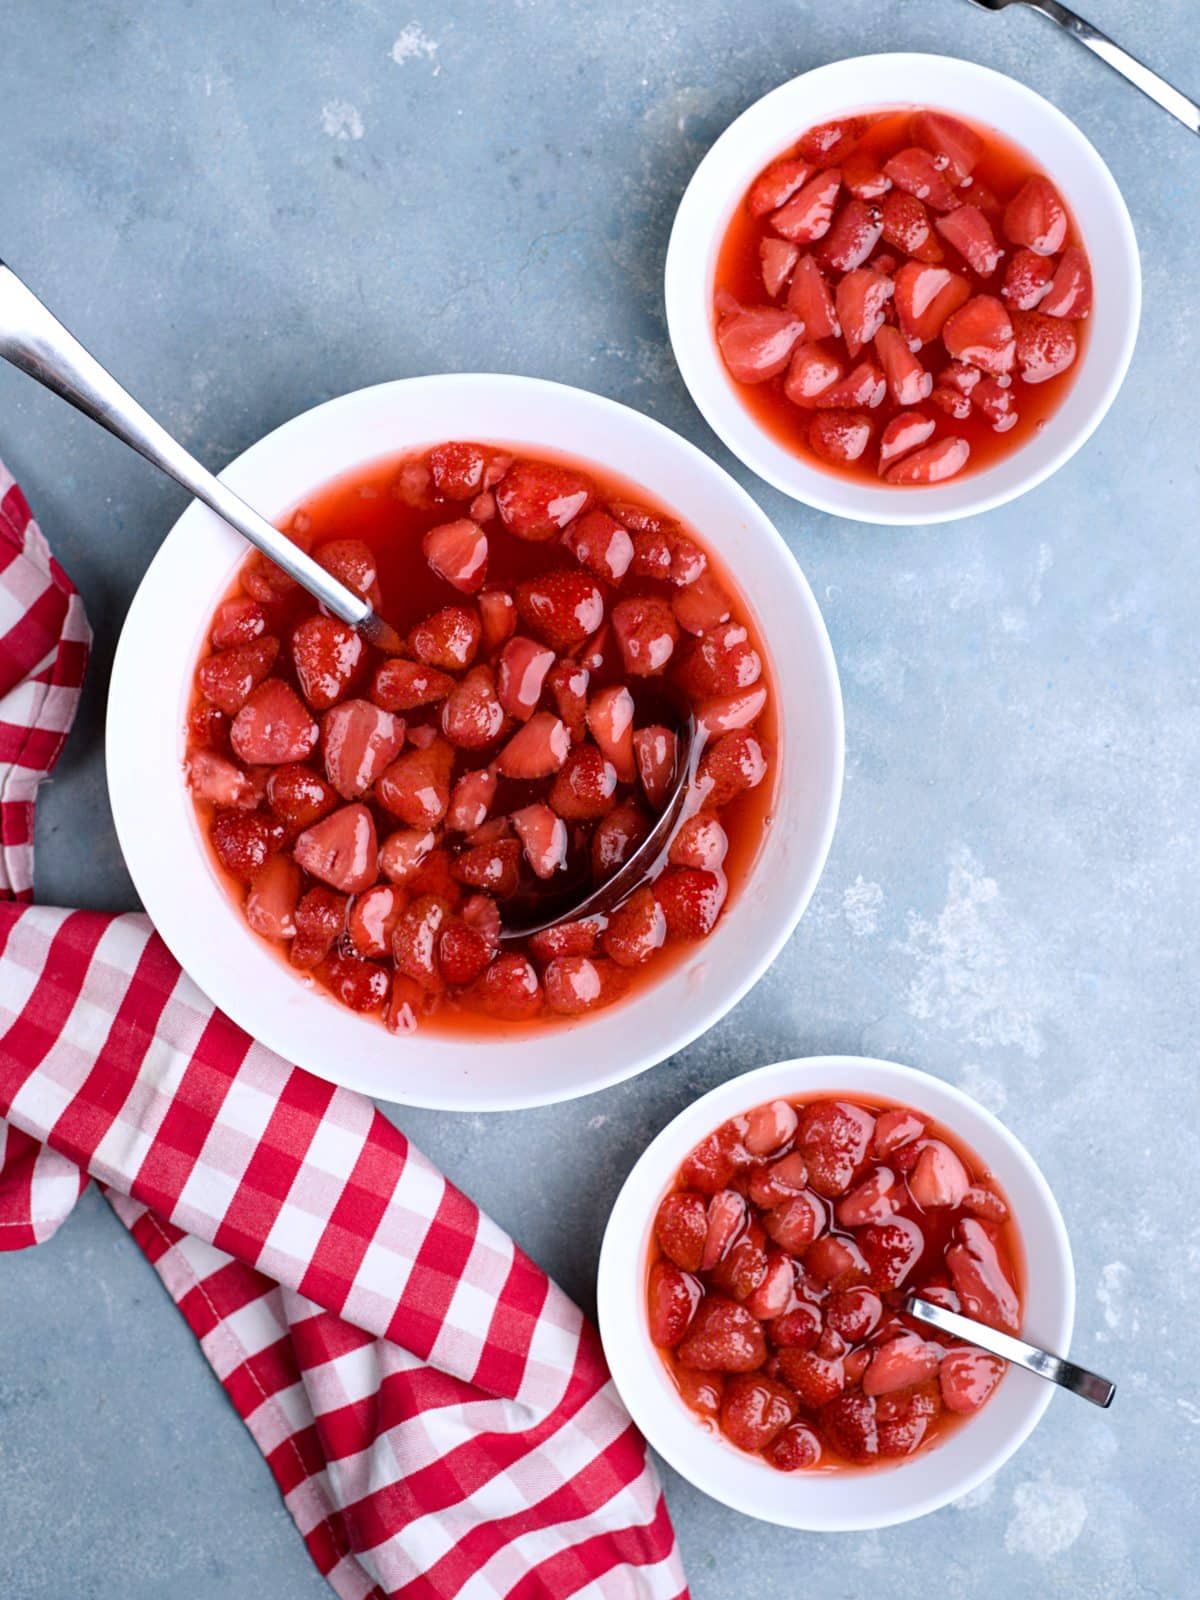 Strawberry soup in large bowl with pieces in it. A red cloth decorating the blue surface. 